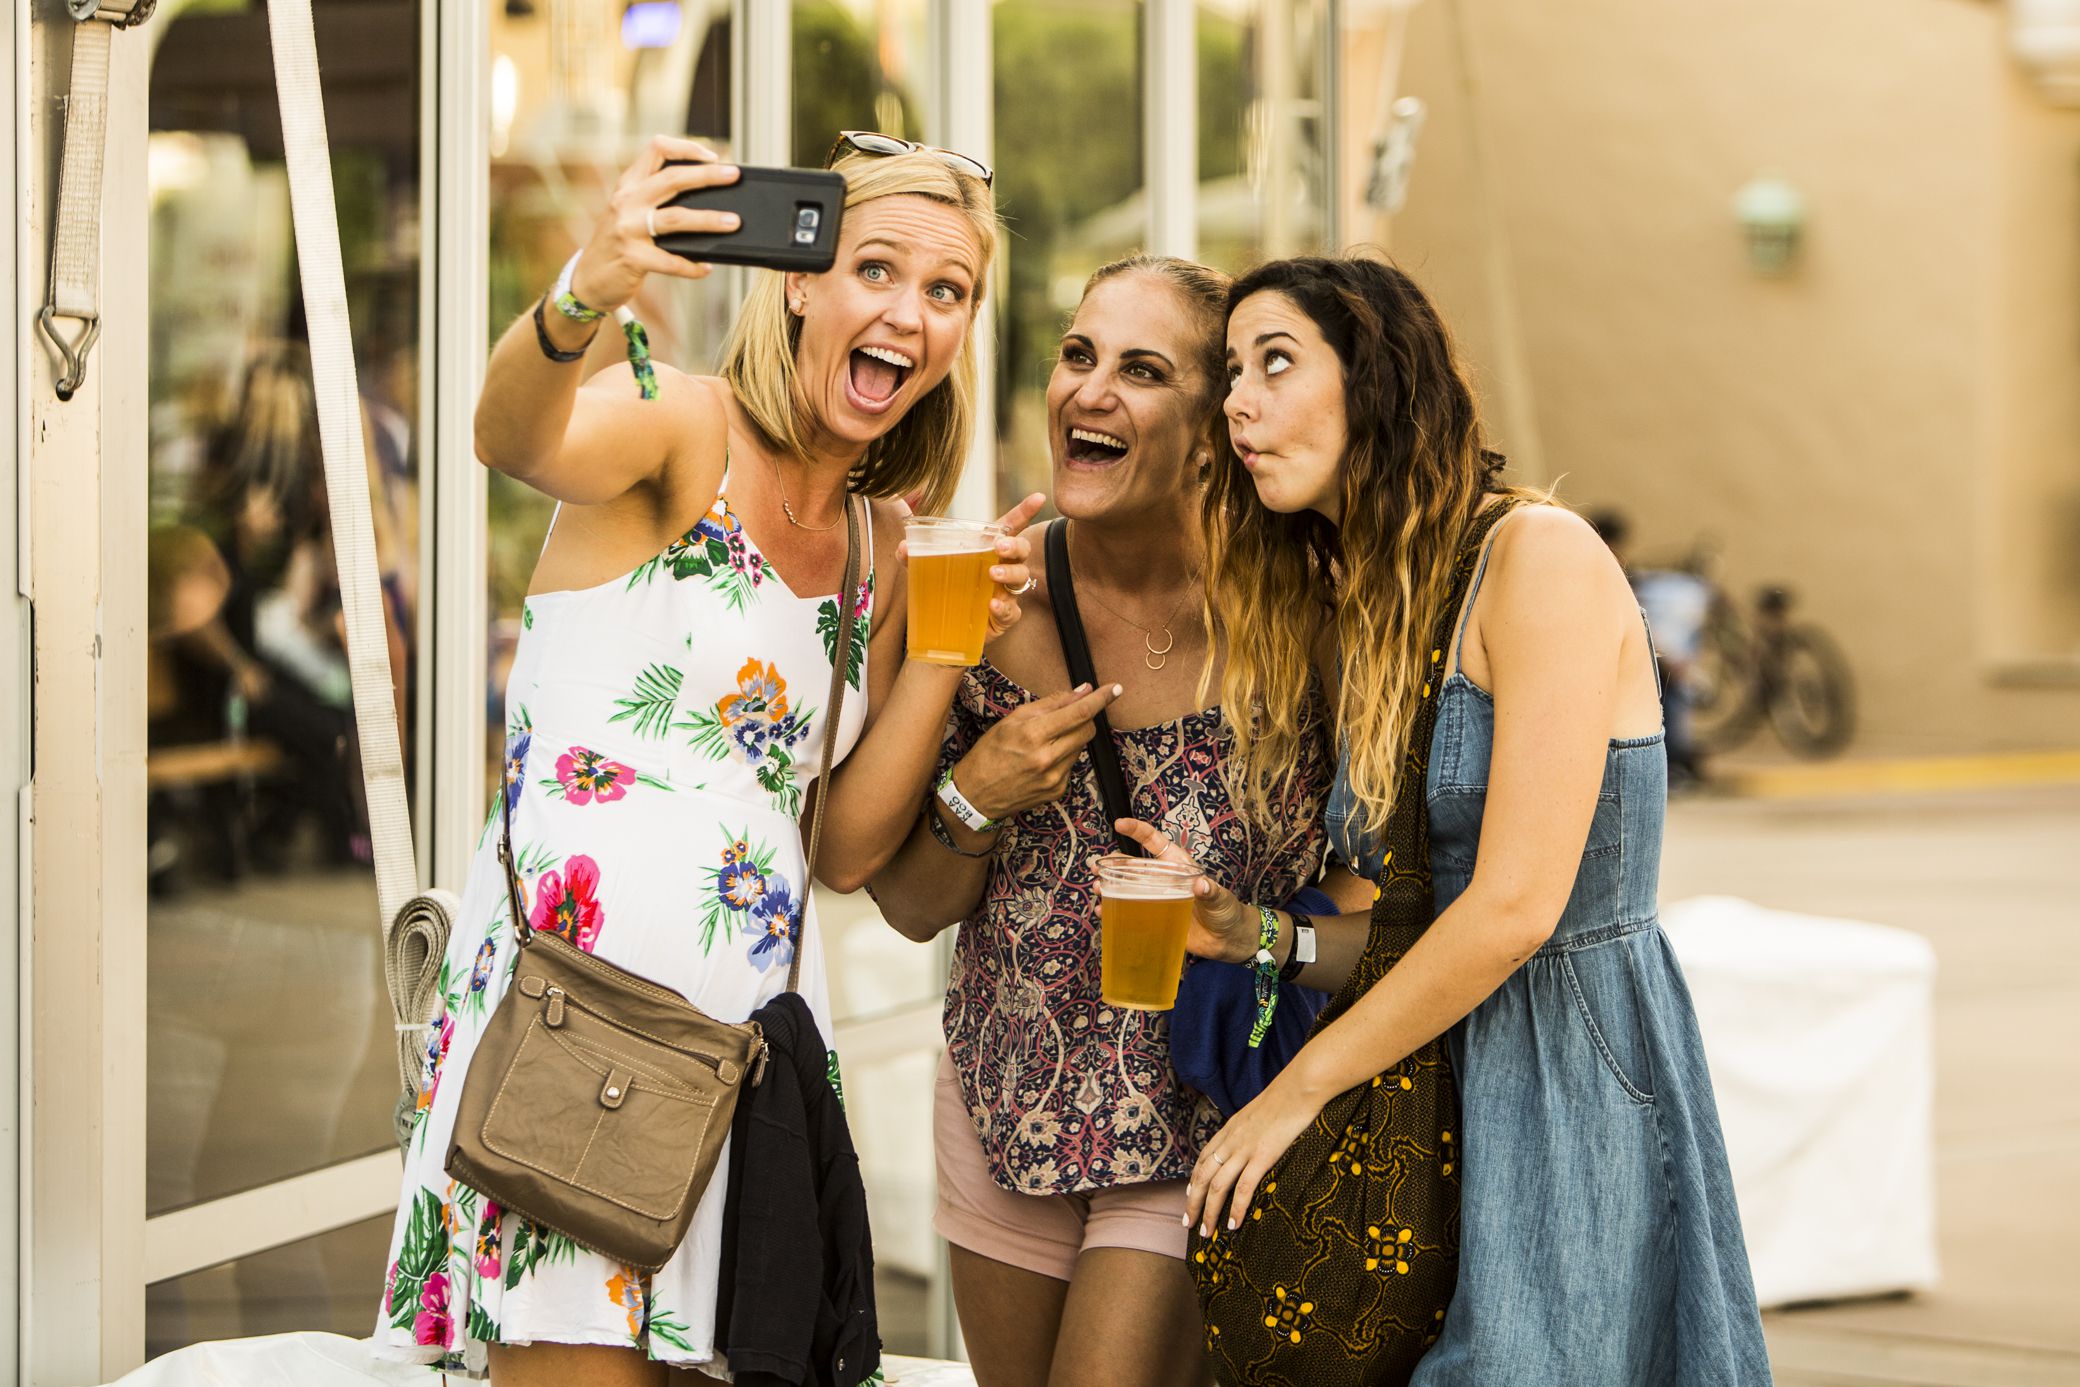 kaaboo 7 KAABOO Del Mar Succeeds at Being a Festival for Everyone